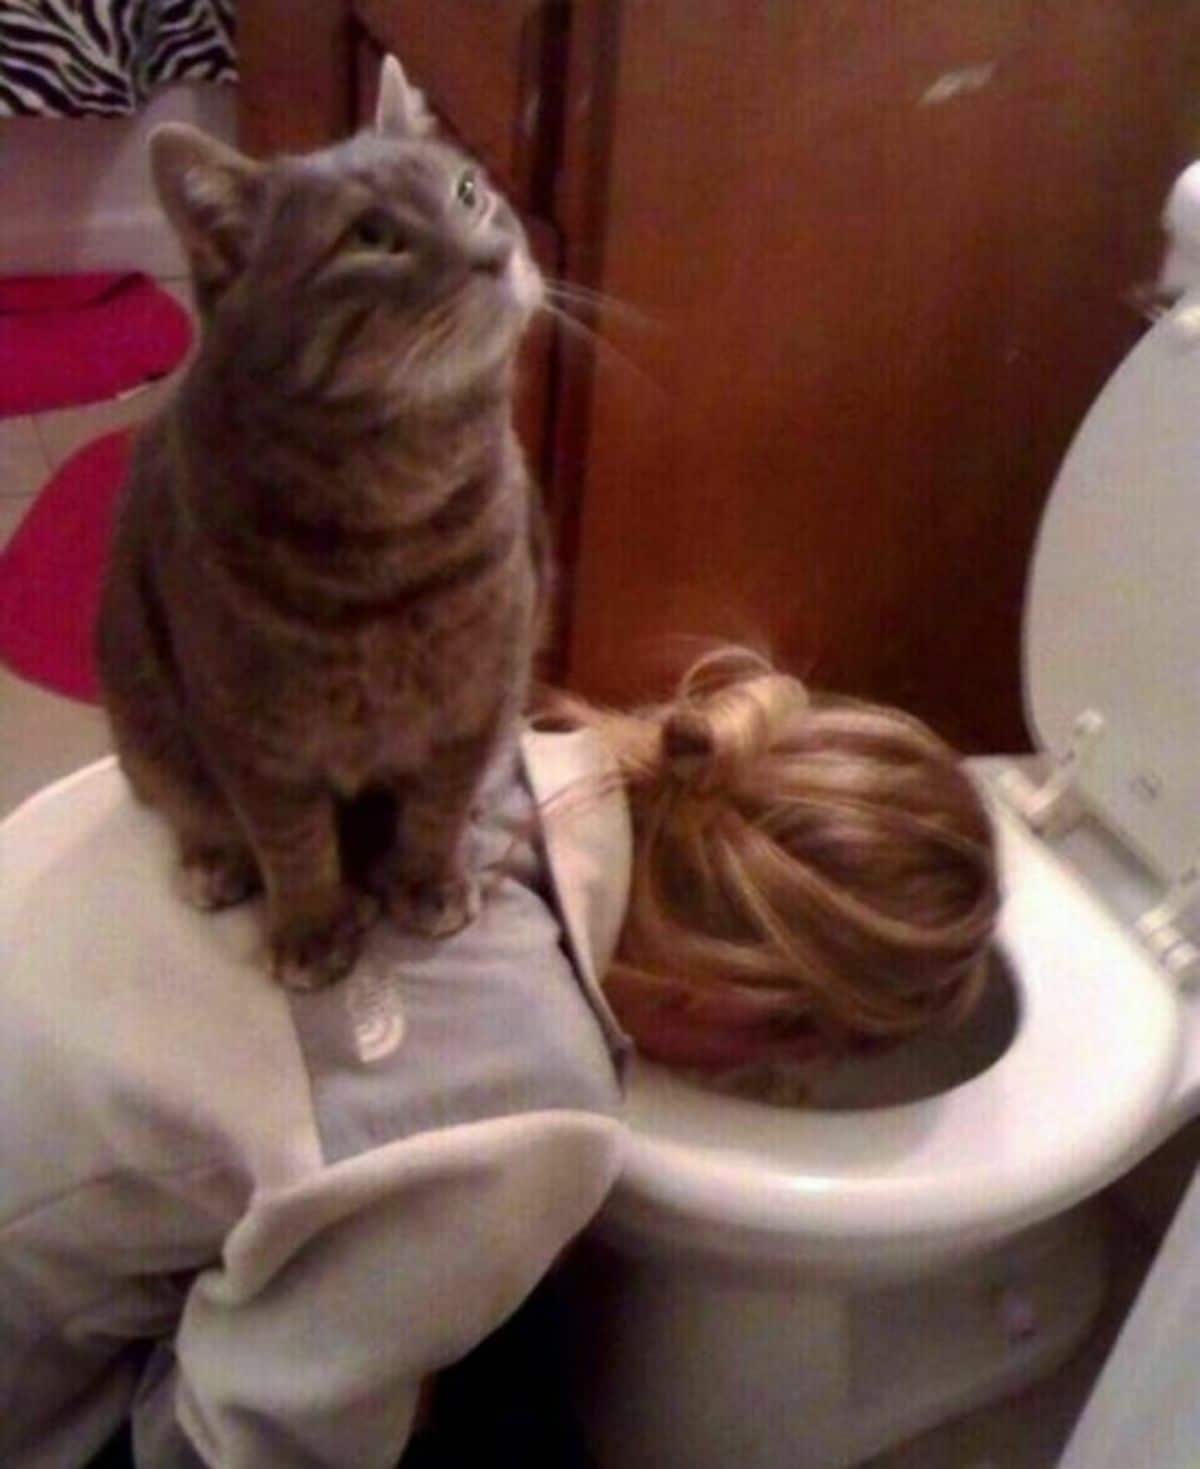 brown and white tabby cat sitting on the back of a person who has their head inside a toilet